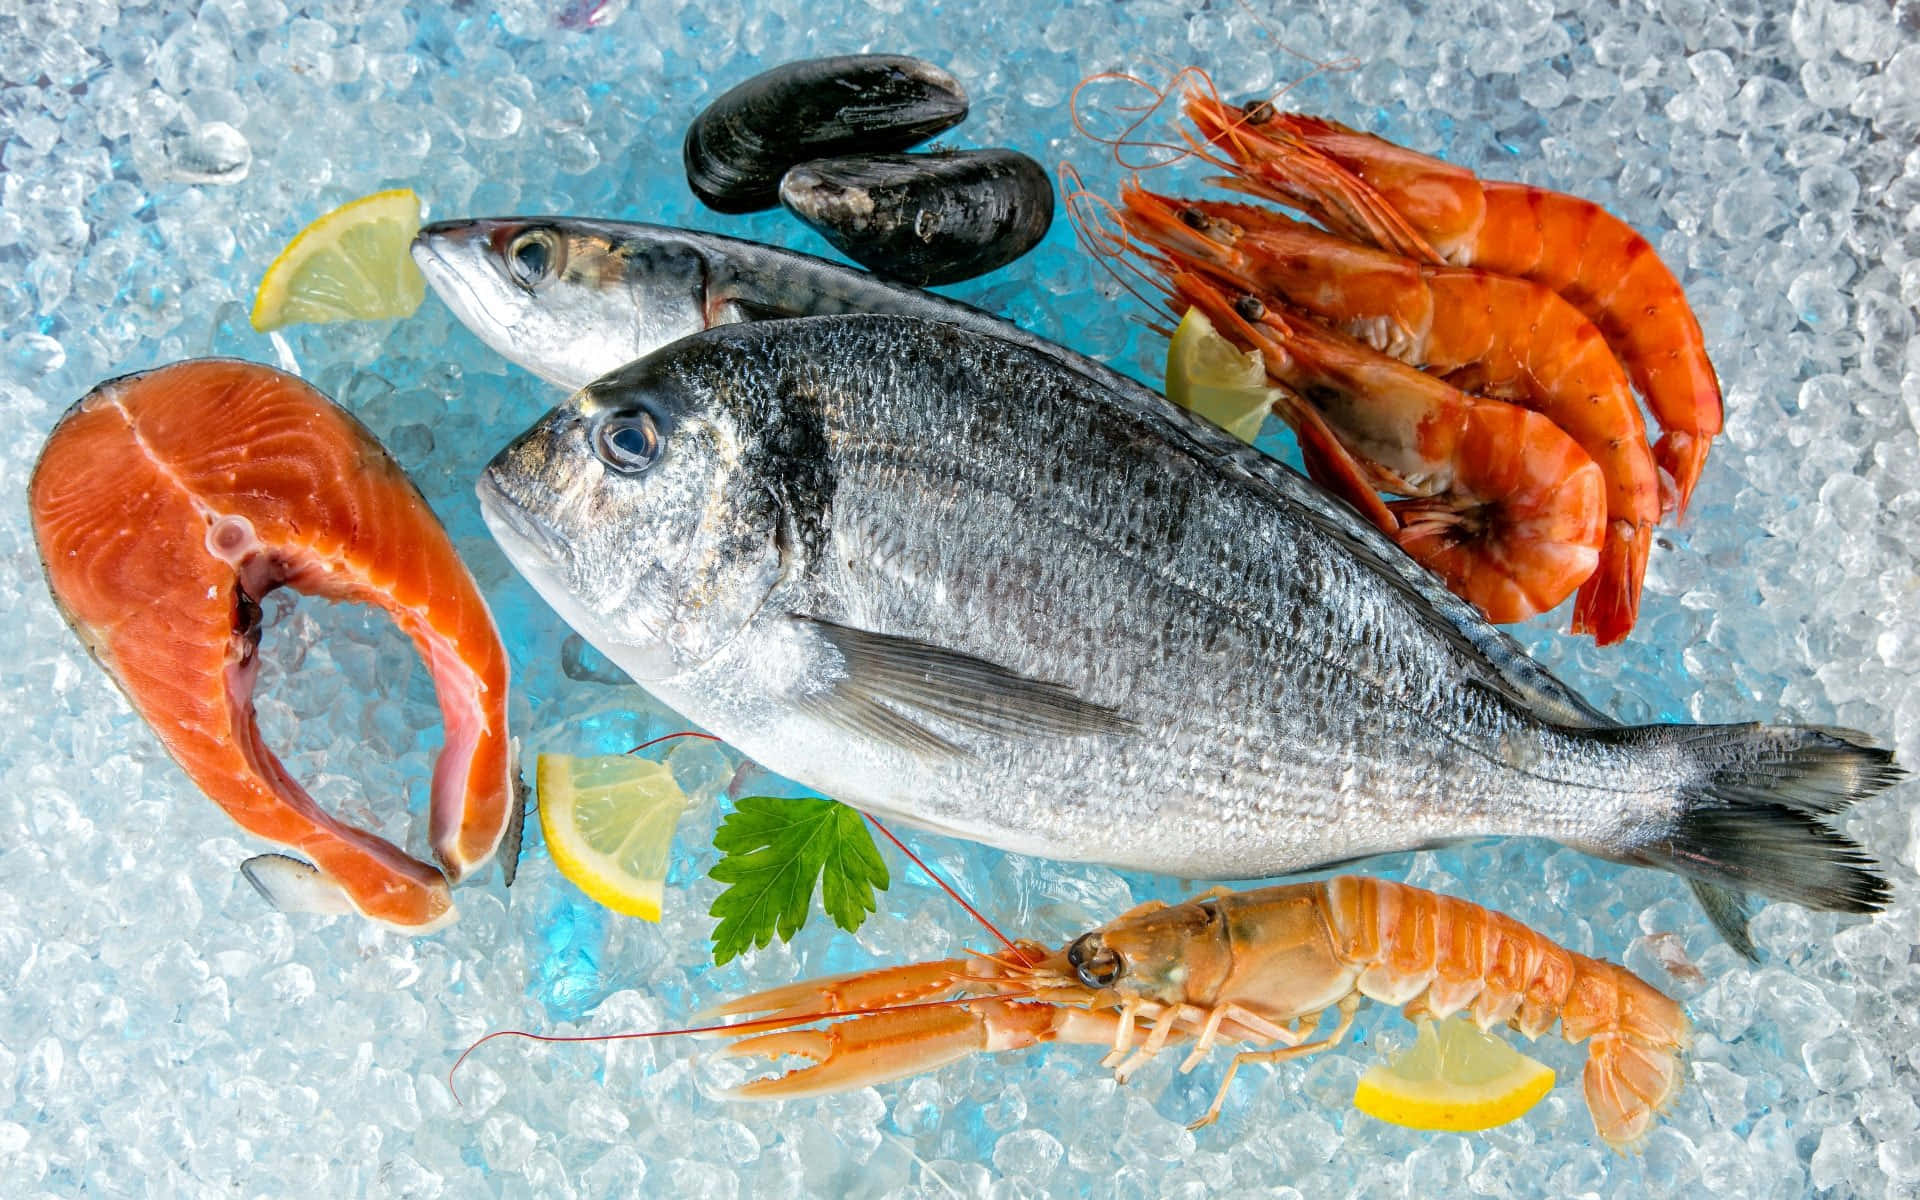 Enjoy the delicious bounty of nature with freshly caught seafood